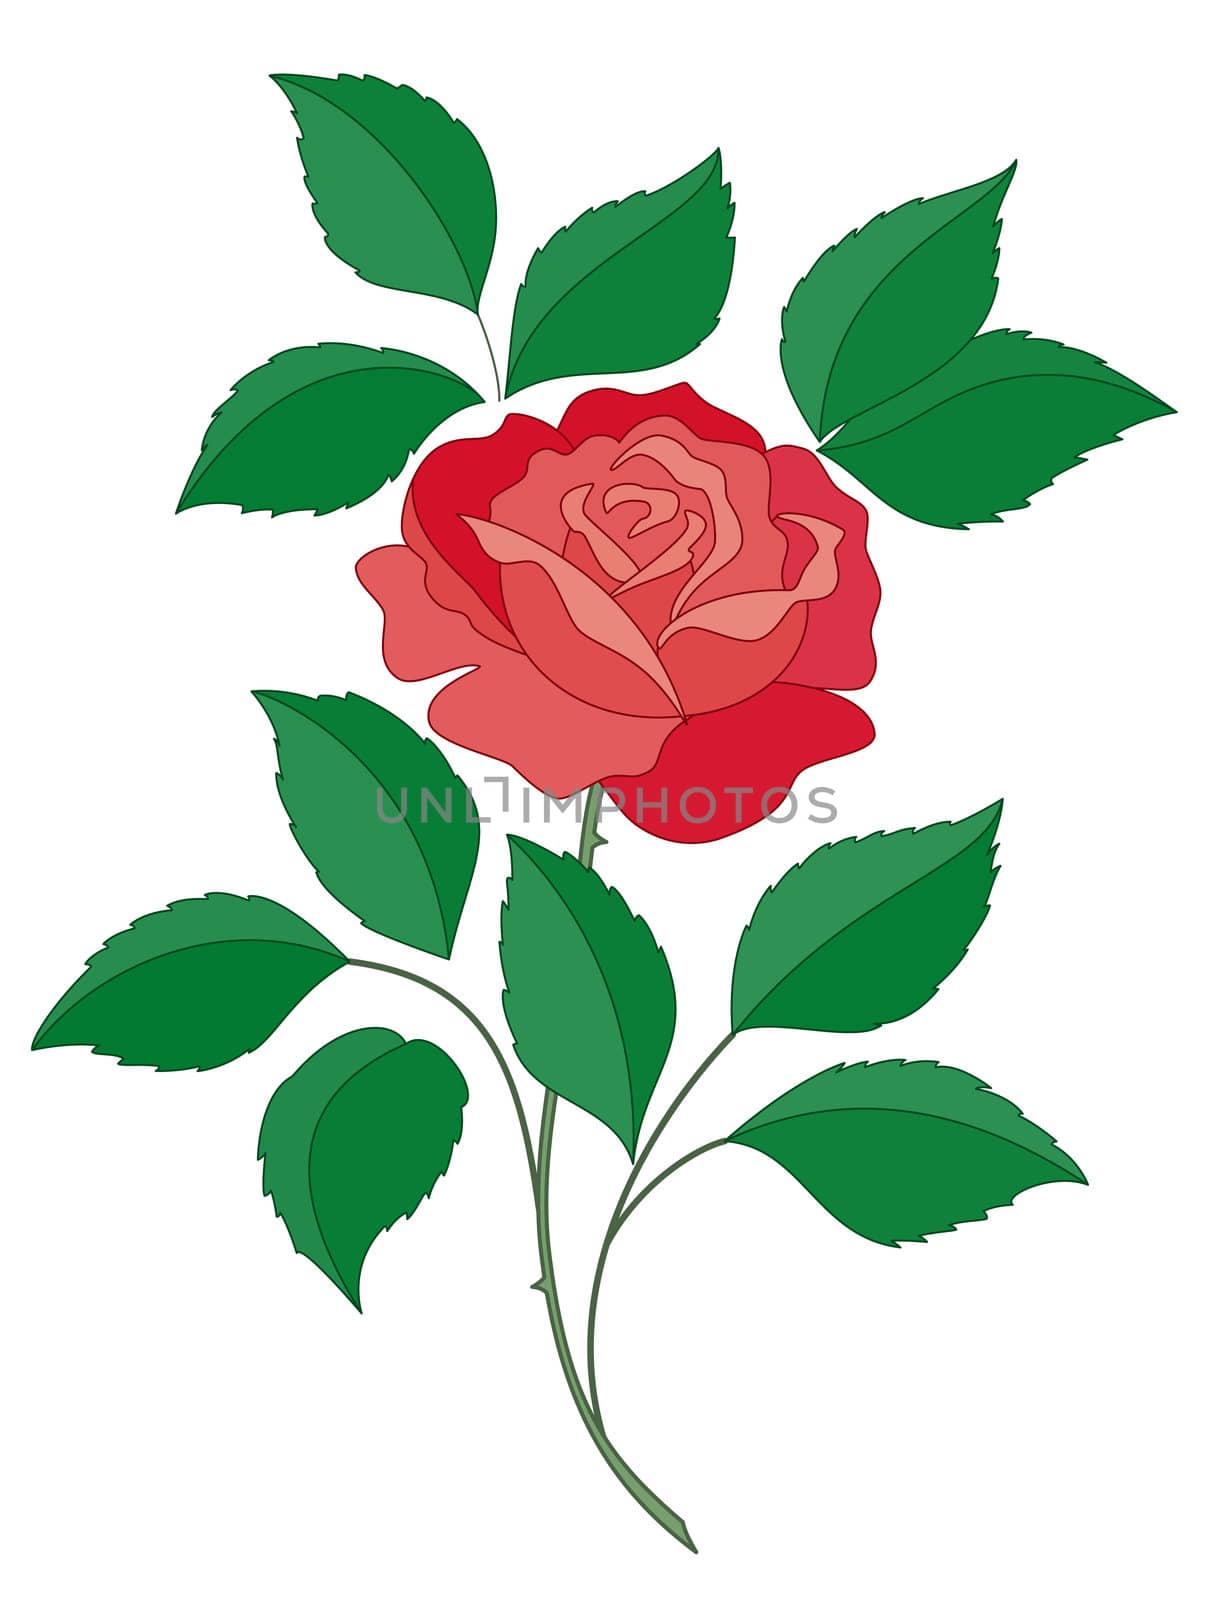 Flower a rose with green leaves and red scarlet petals on a white background